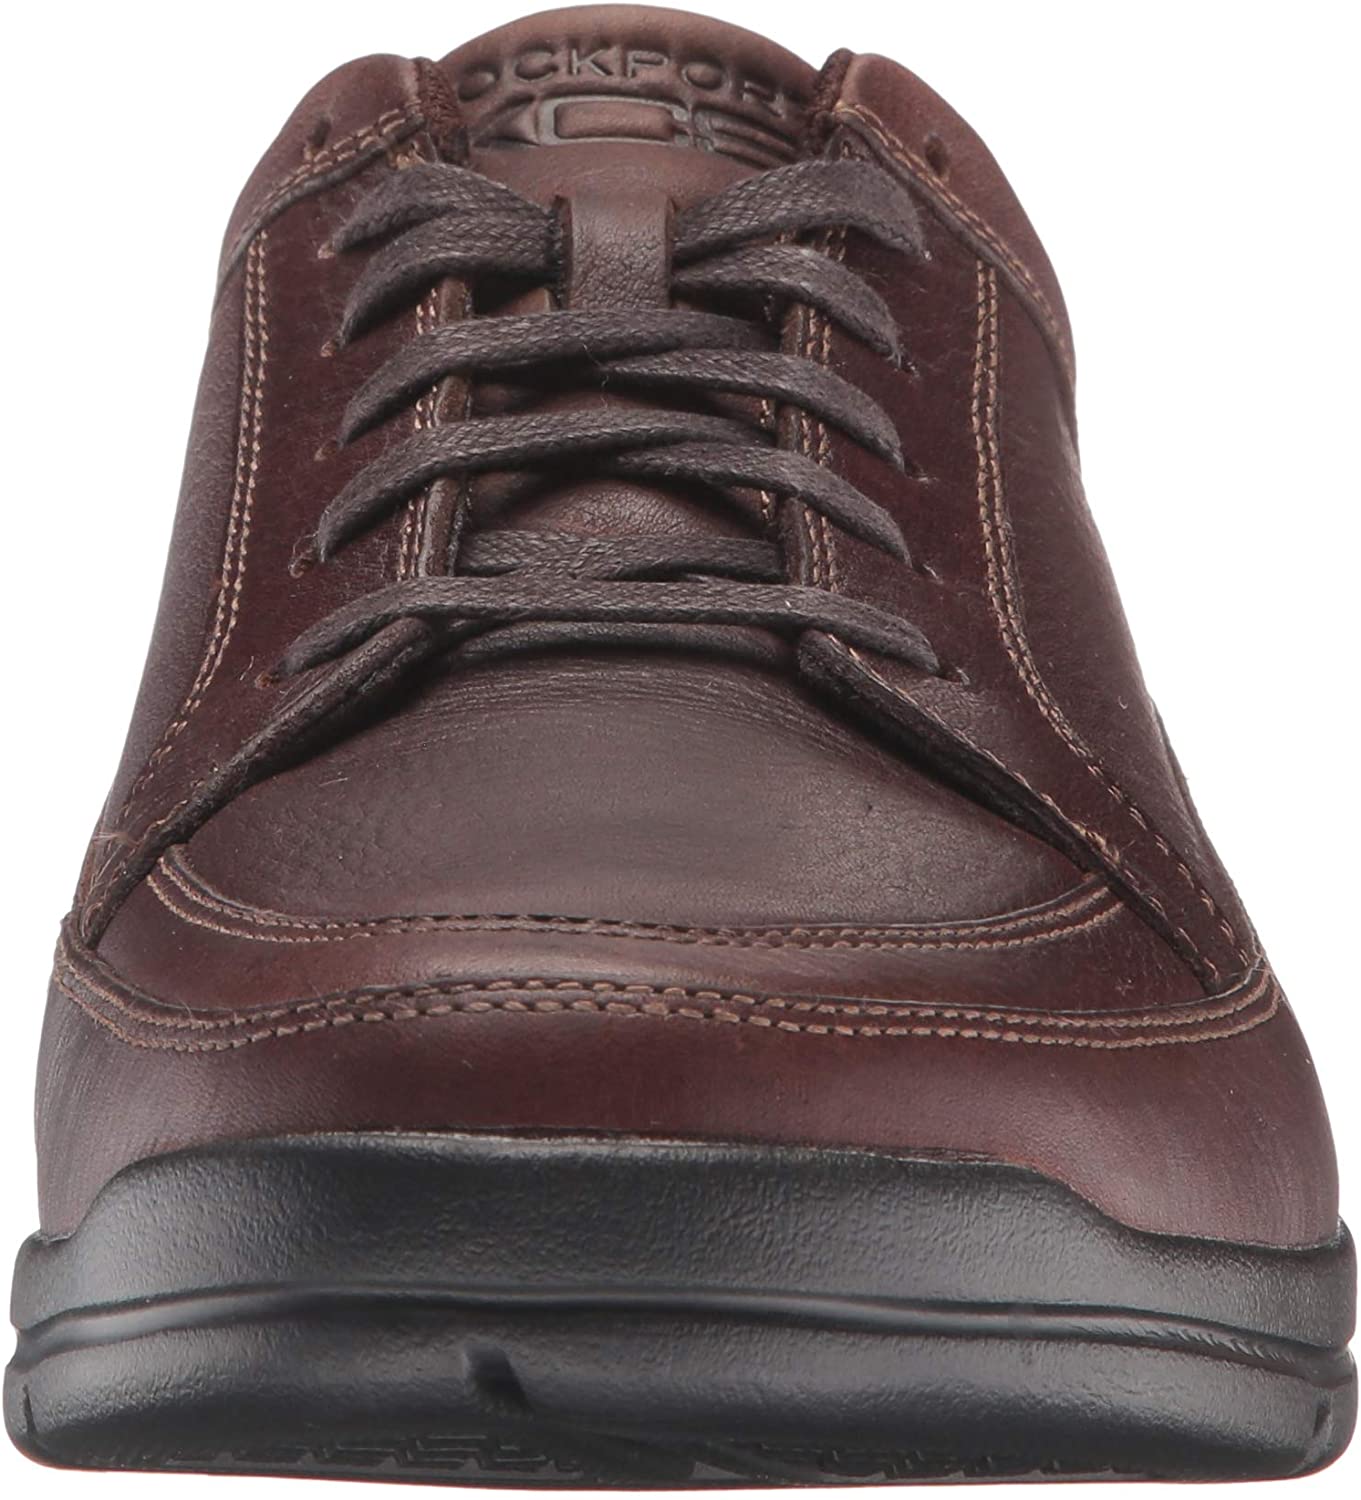 Rockport Men's Junction Point Lacetotoe Oxford, Chocolate, Size 10.5 ...